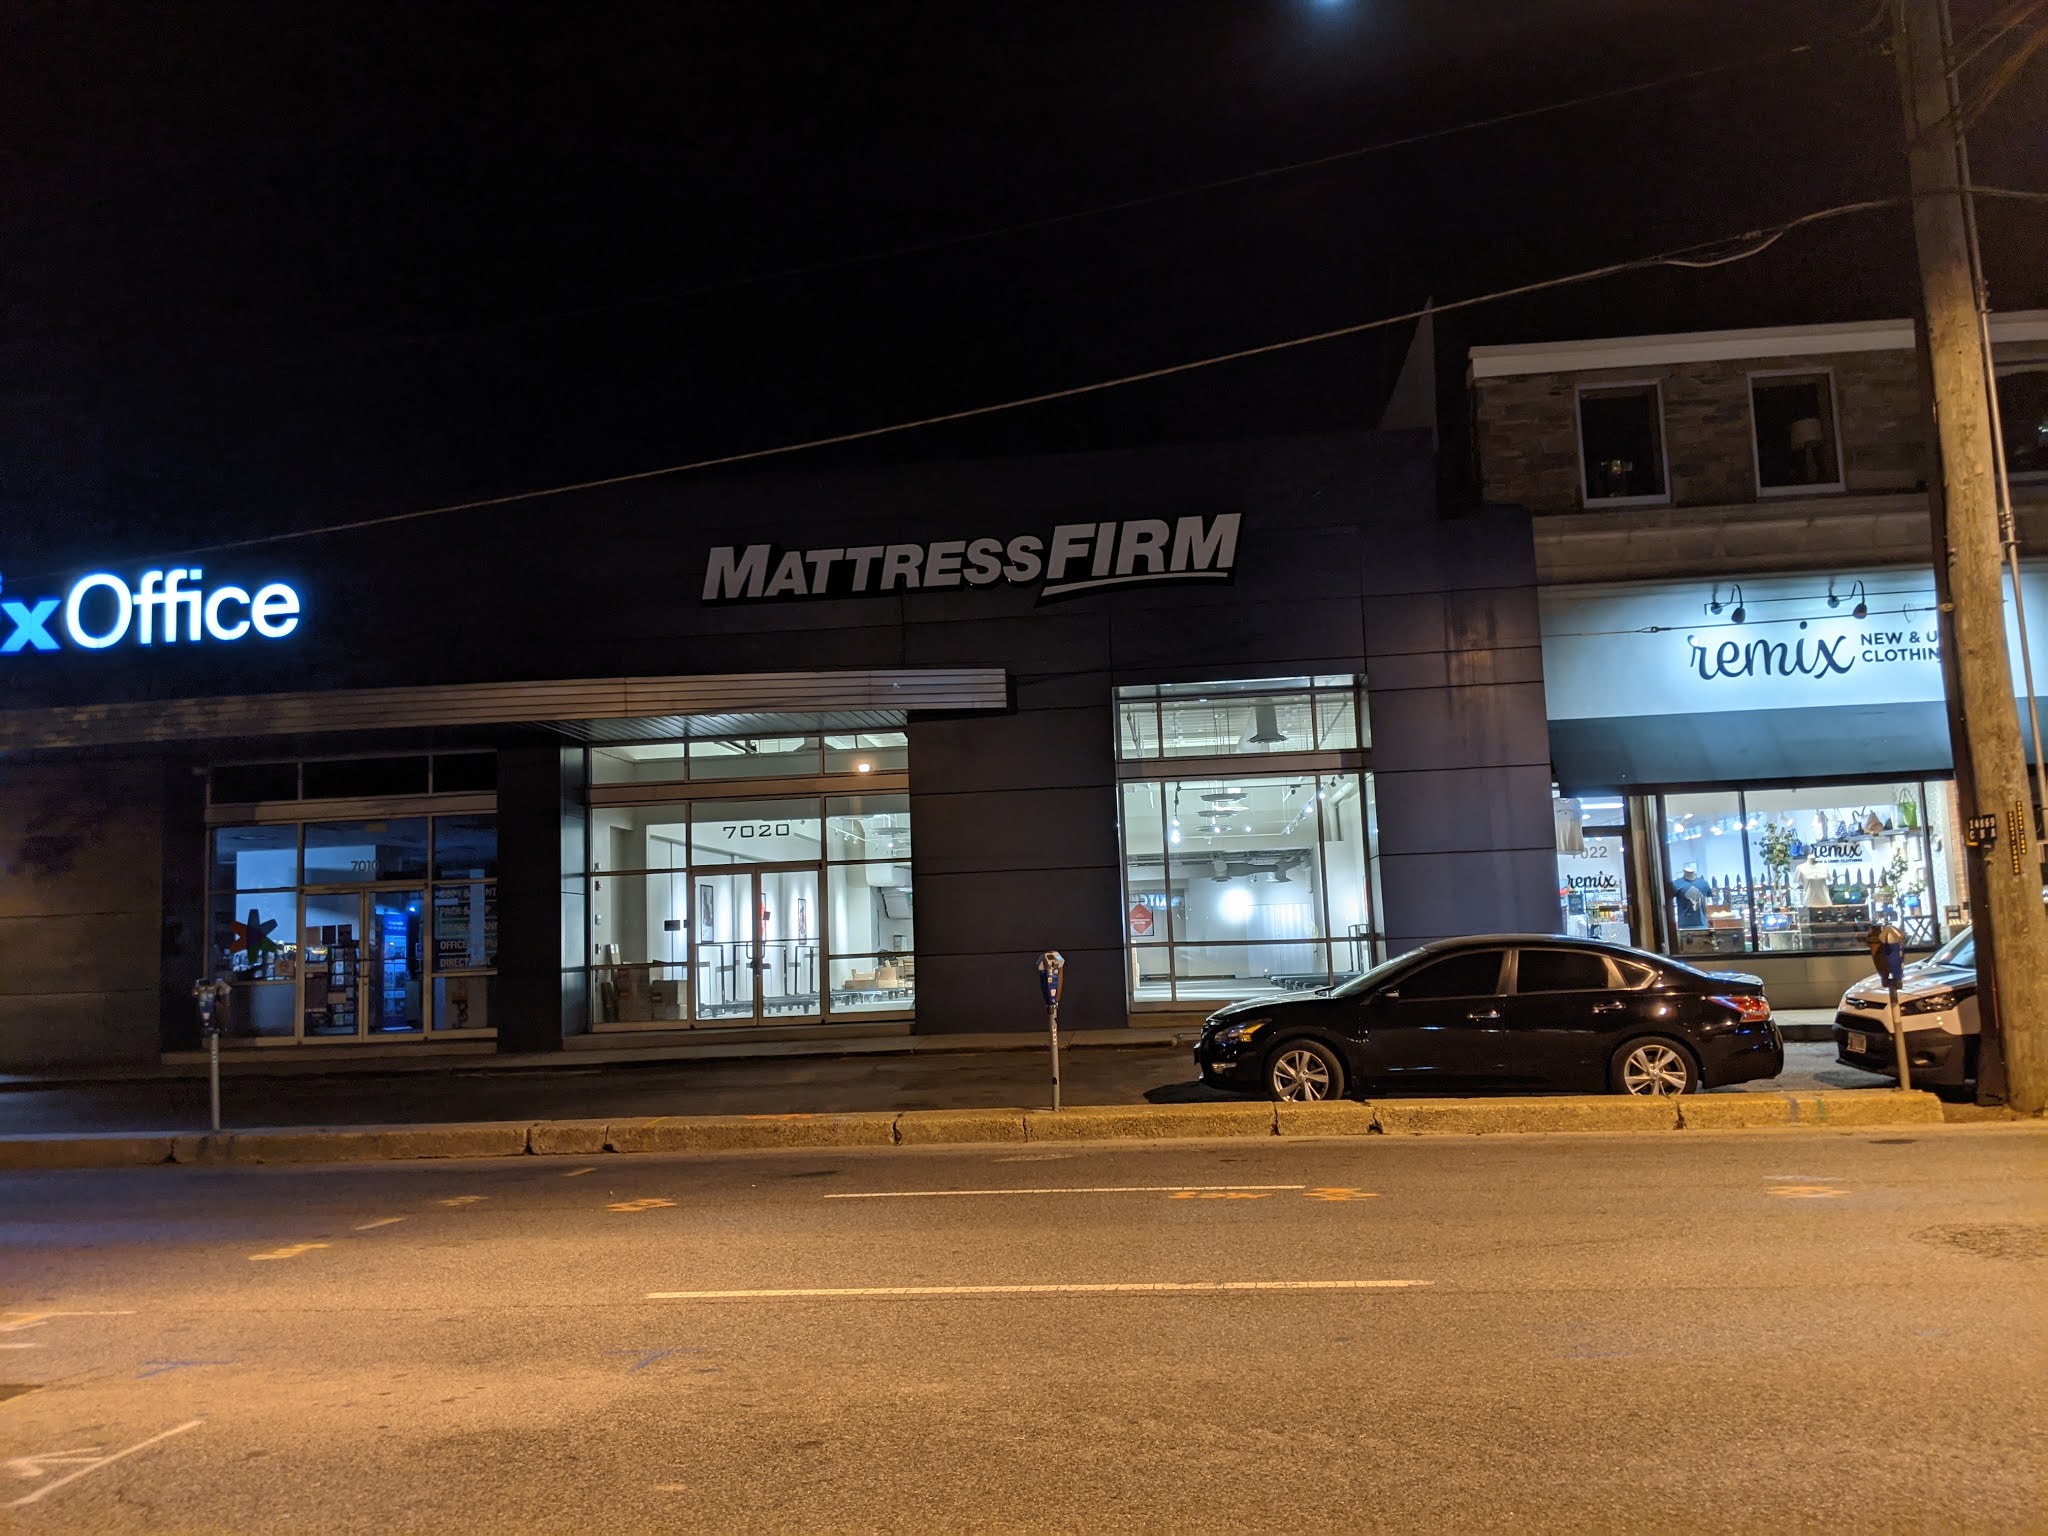 location for mattress firm